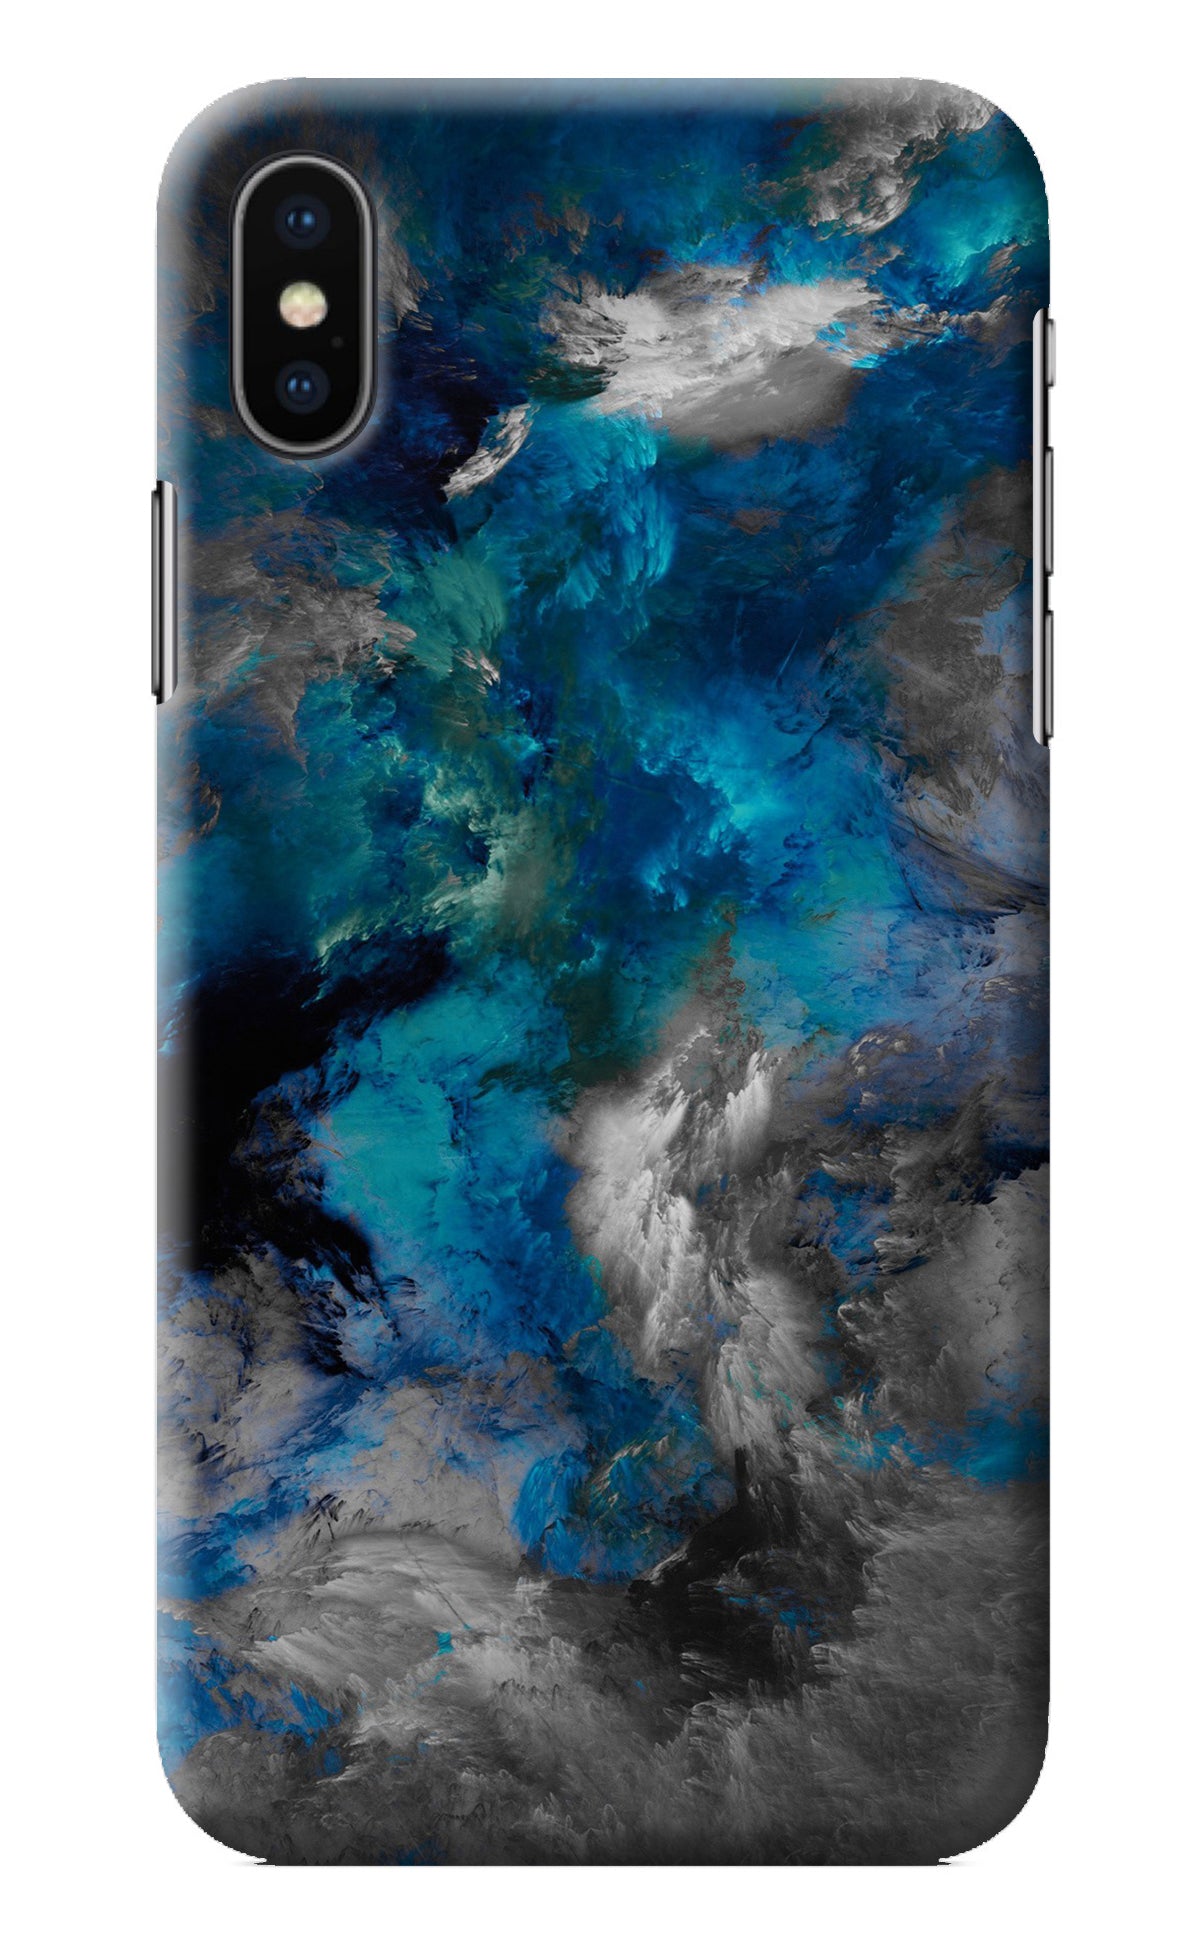 Artwork iPhone XS Back Cover